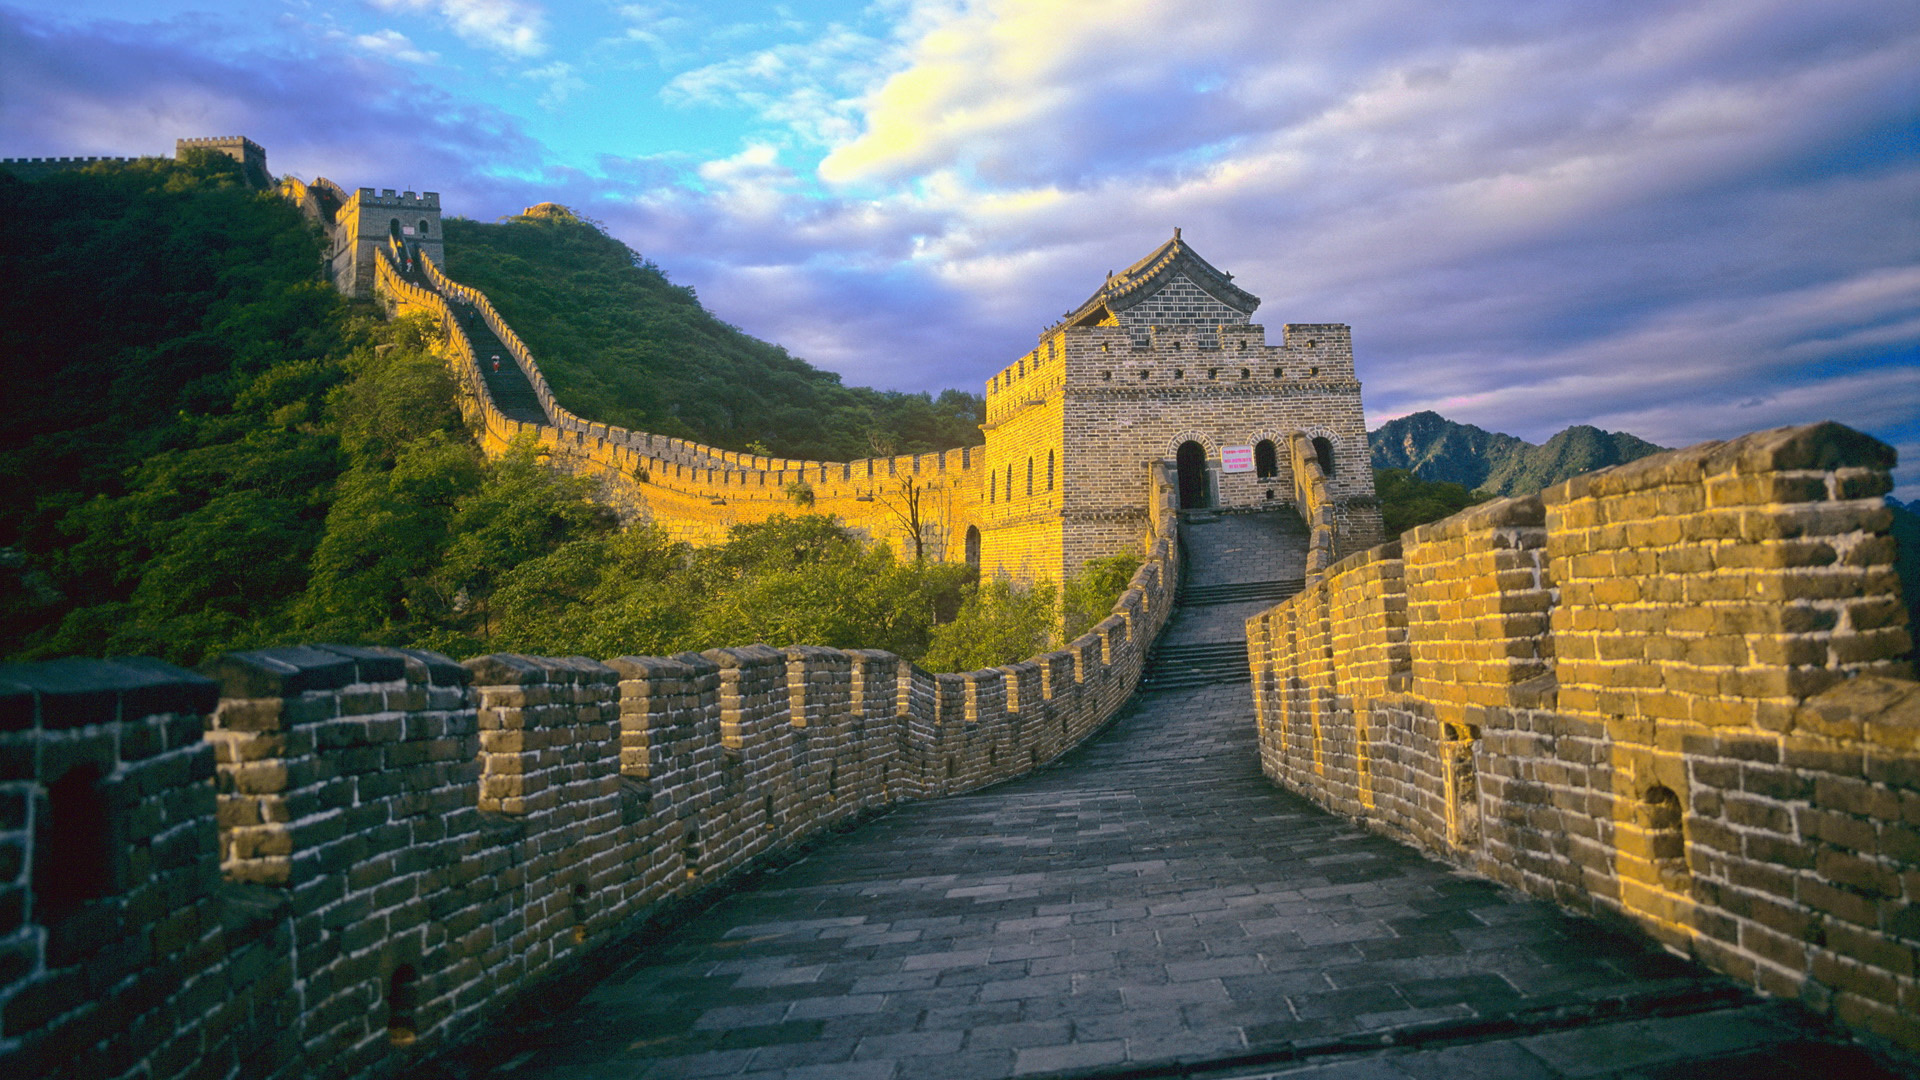 Builders of China's Great Wall